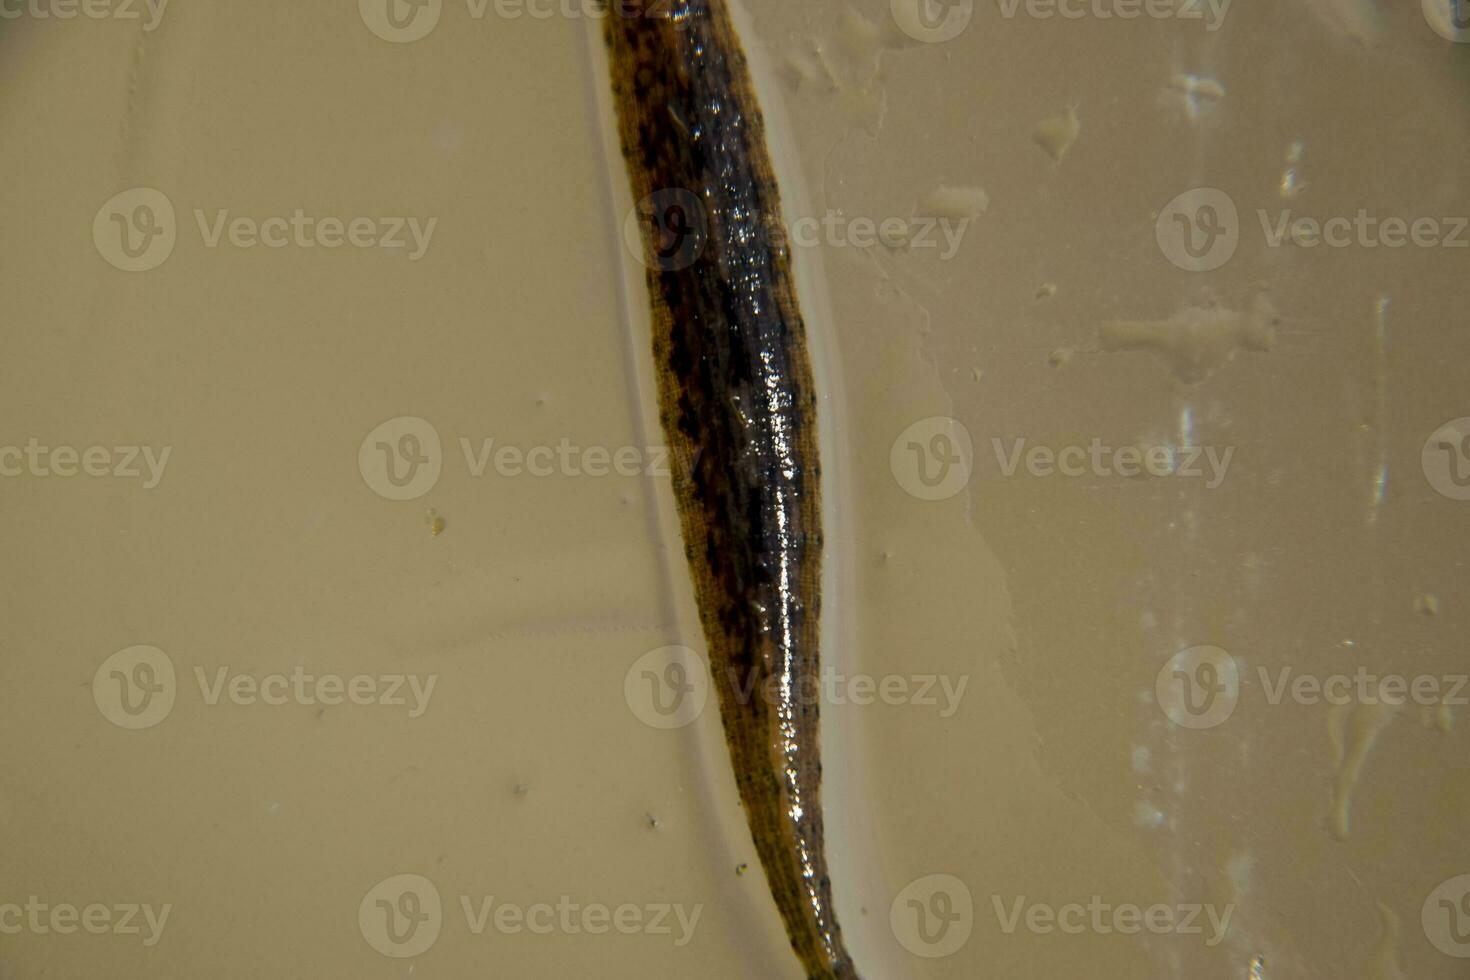 Leech on the glass. Bloodsucking animal. subclass of ringworms from the belt-type class. Hirudotherapy photo